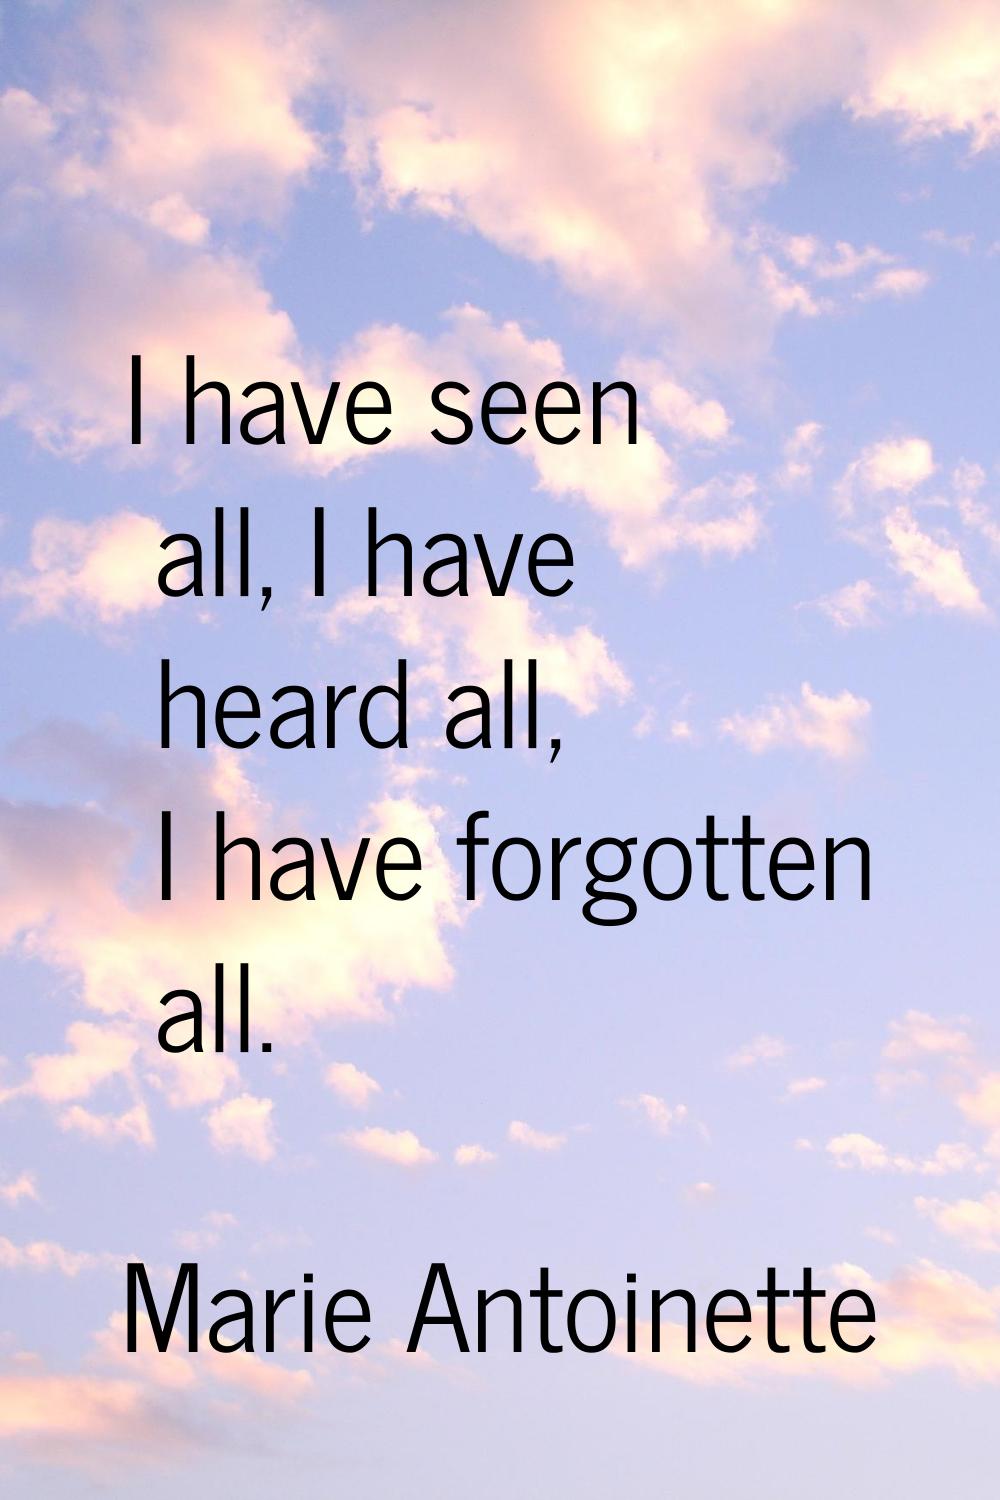 I have seen all, I have heard all, I have forgotten all.